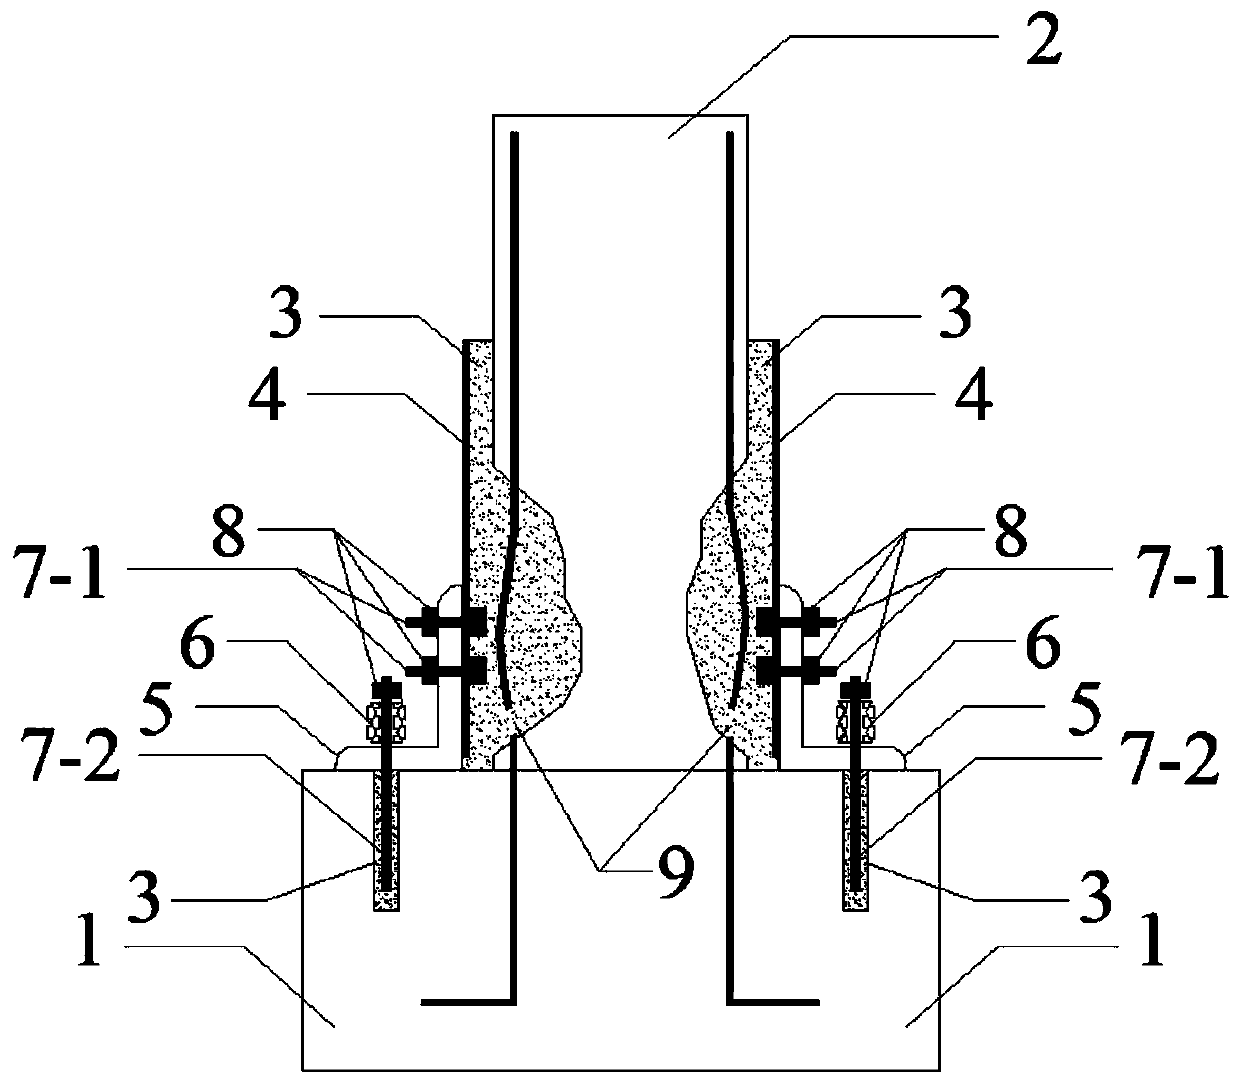 Method for quickly repairing reinforced concrete piers after earthquake